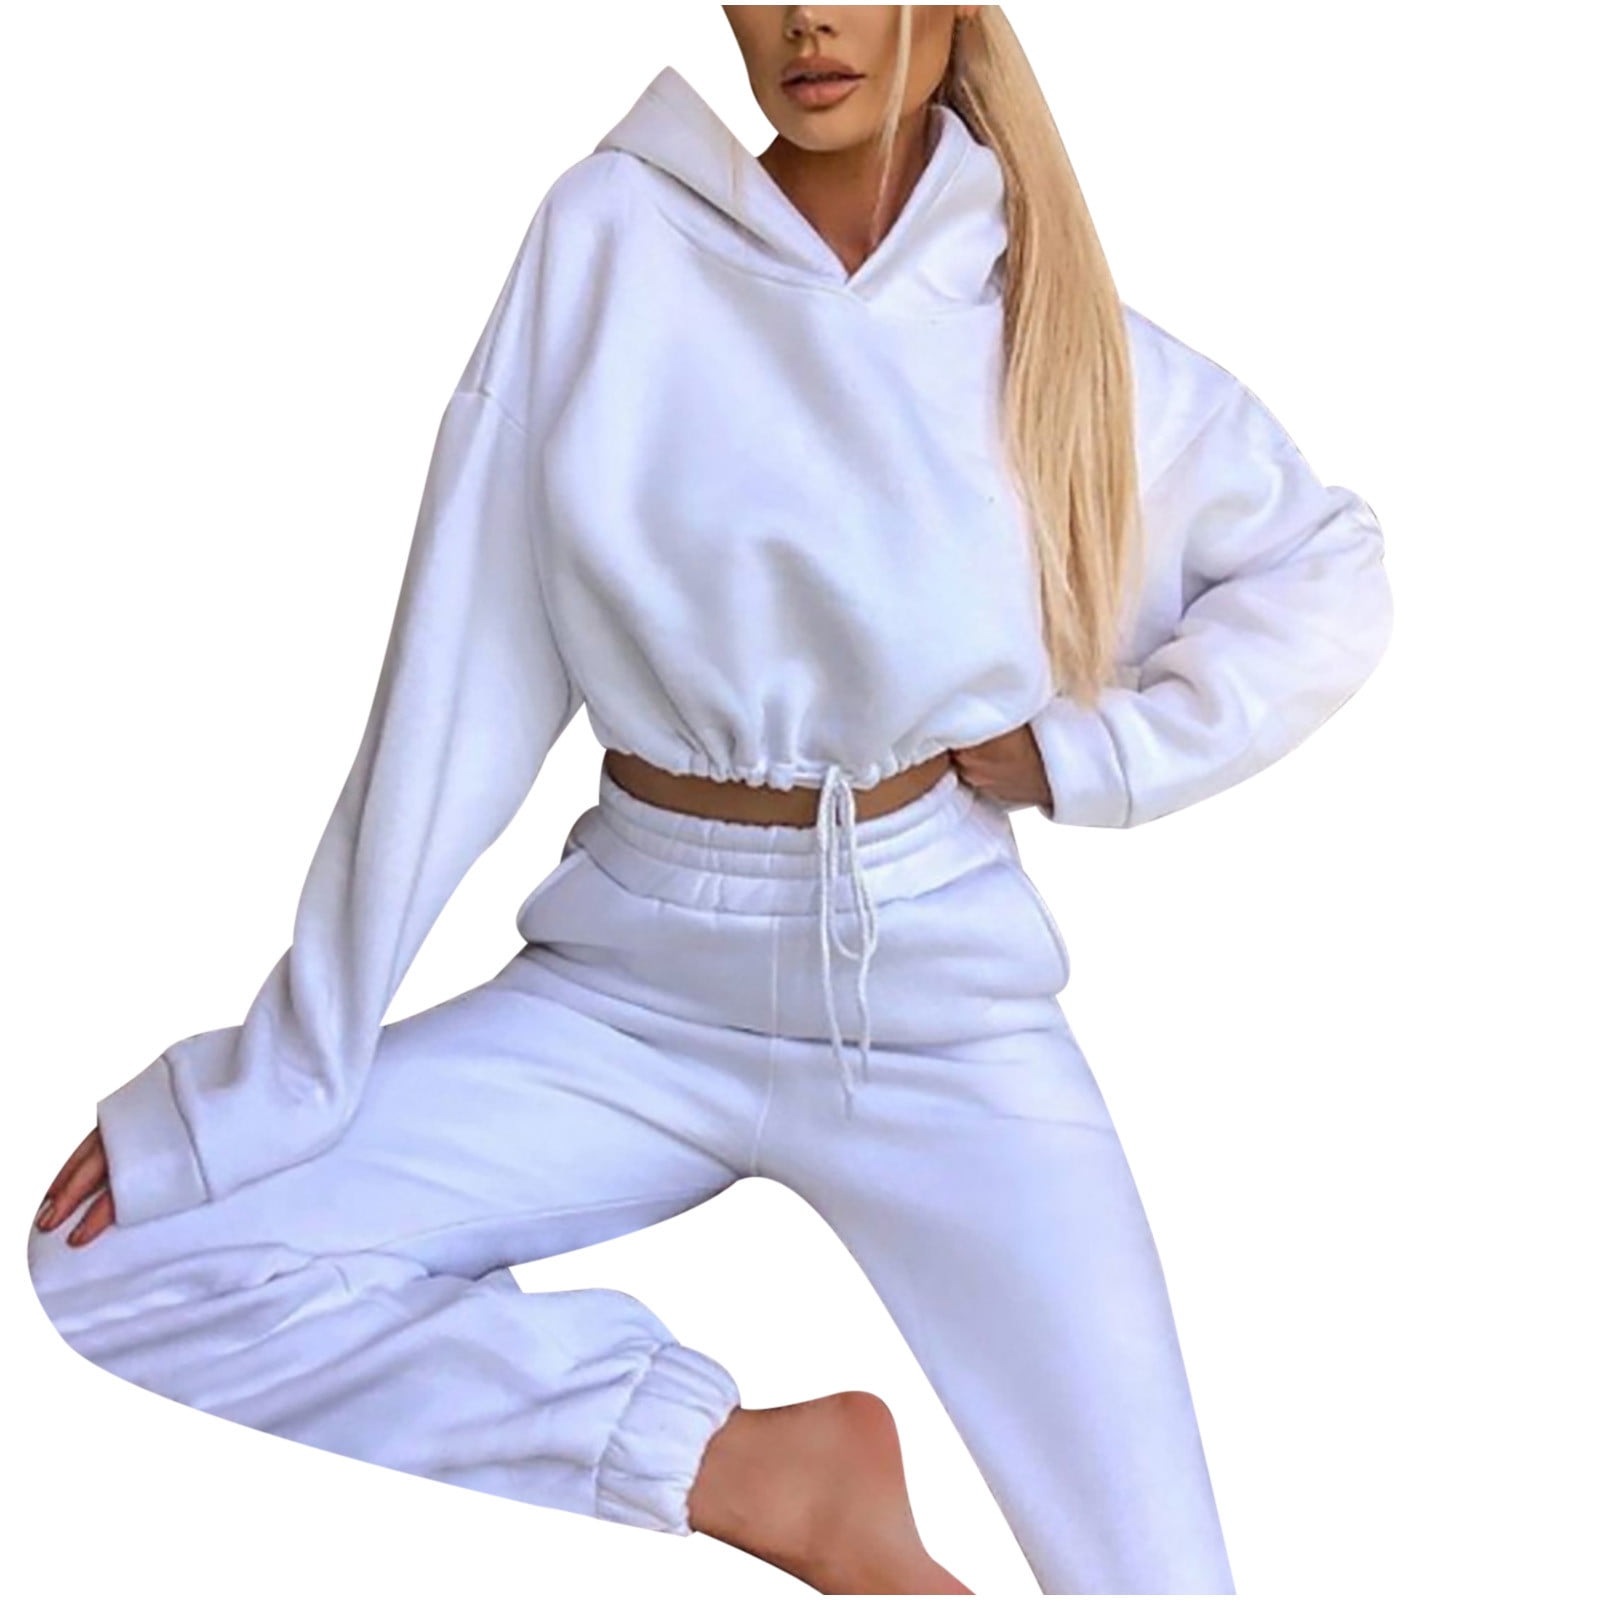 Jogging Suits for Women Sweatsuit 2 Piece Outfits Long Sleeve ...